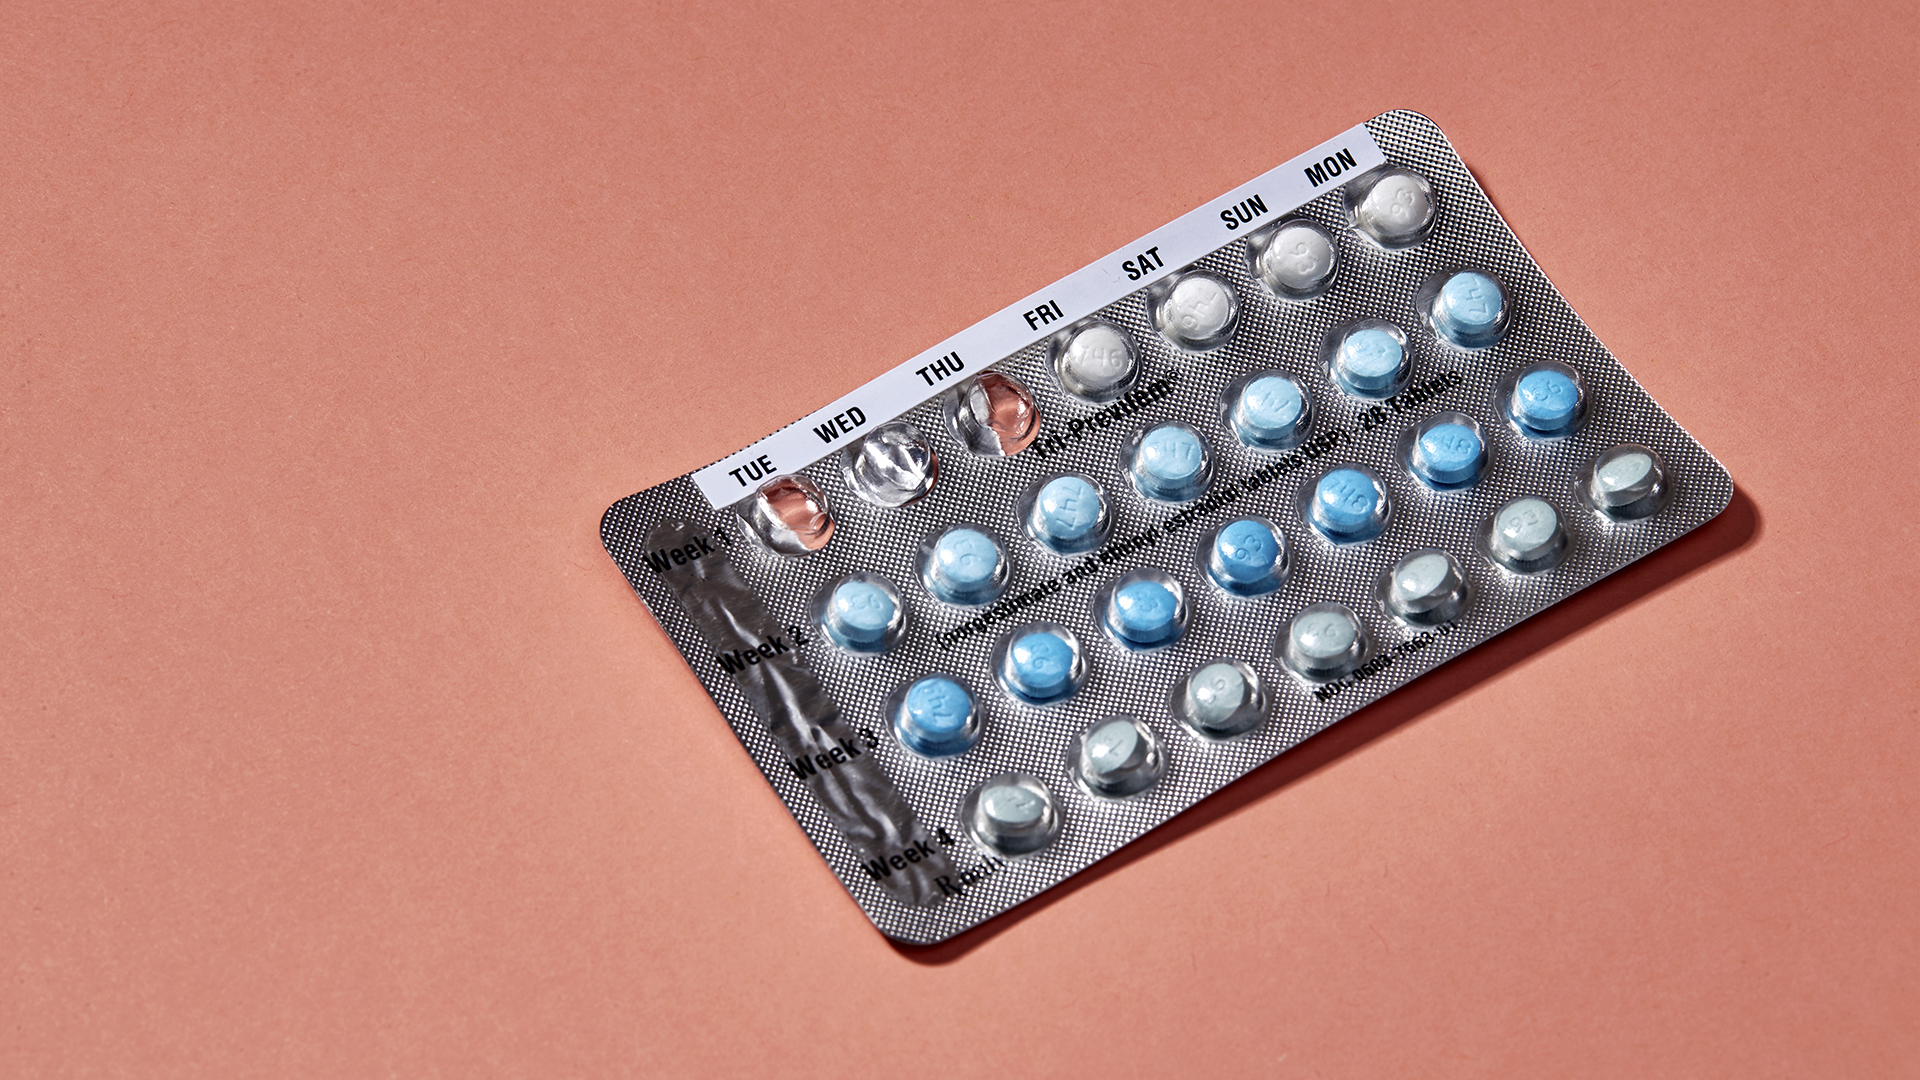 Birth Control Pills And The Connection To Miscarriage